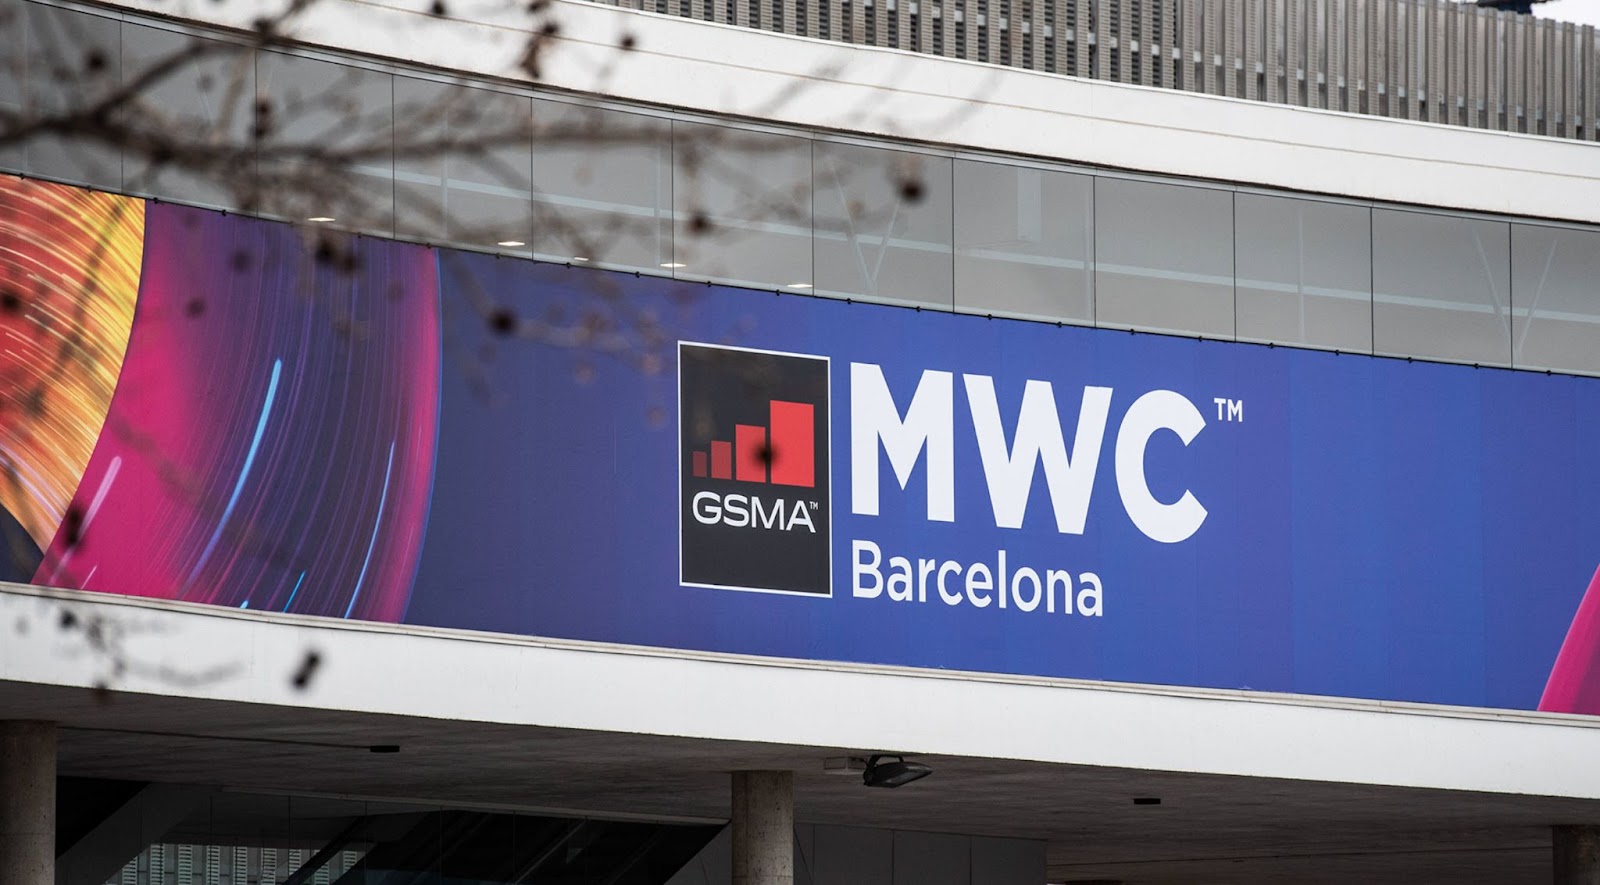 MWC 2022 will take place physically, and preparations continue despite increasing number of Omicron cases thumbnail